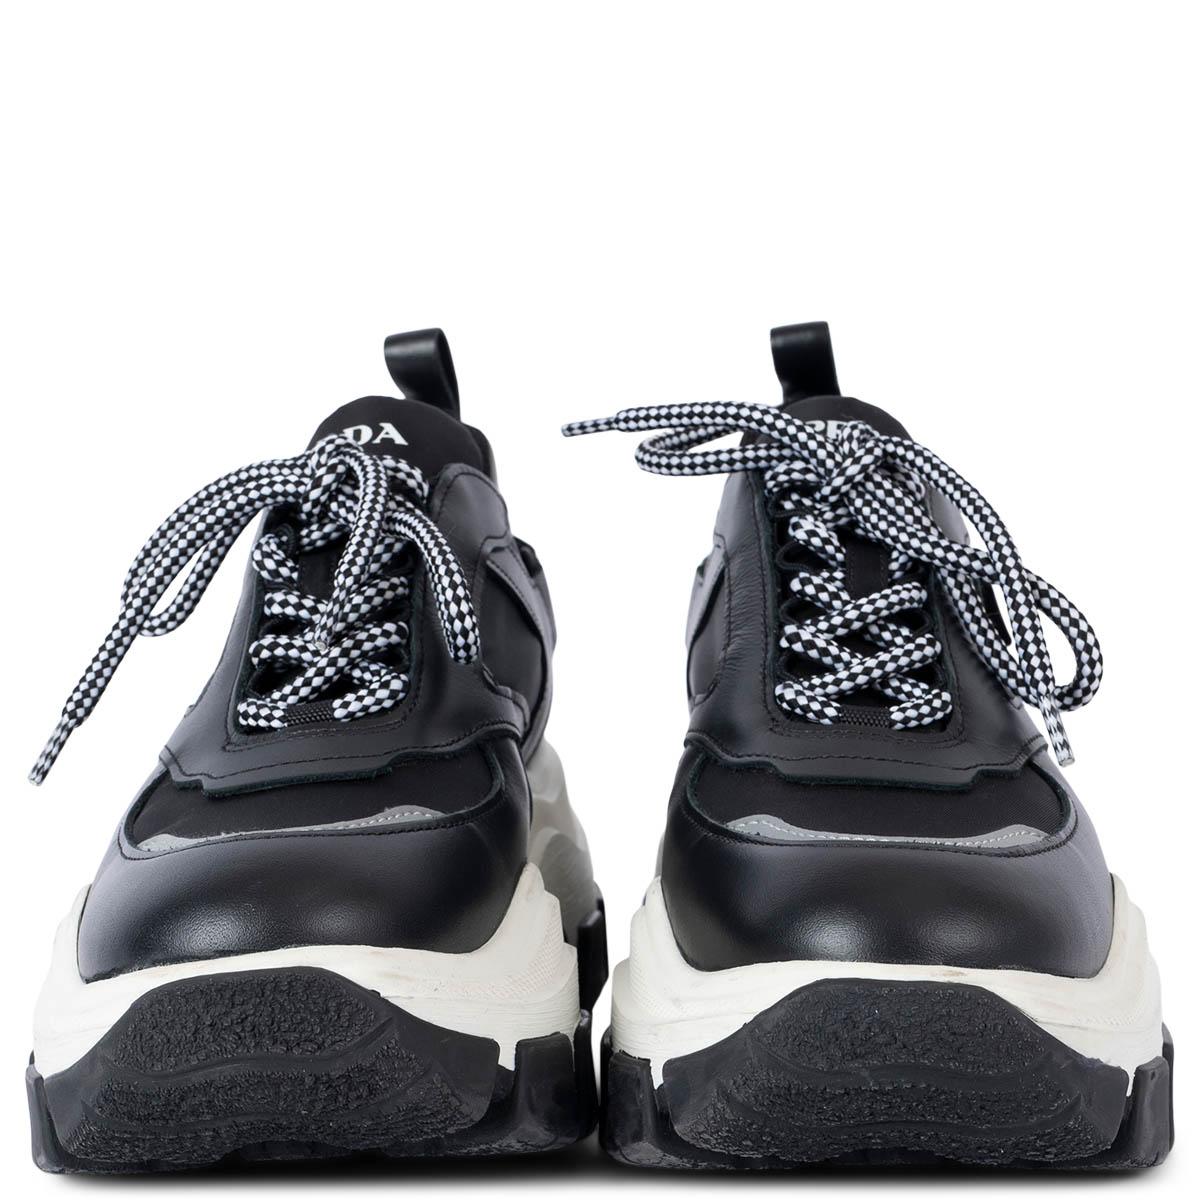 100% authentic Prada Pegasus platform sneakers in black and reflective silver-tone nylon and leather set on a chunky white rubber sole. Logo printed in white at padded tongue. Padded collar. Pull-loop at heel collar. Rubberized Velcro strap